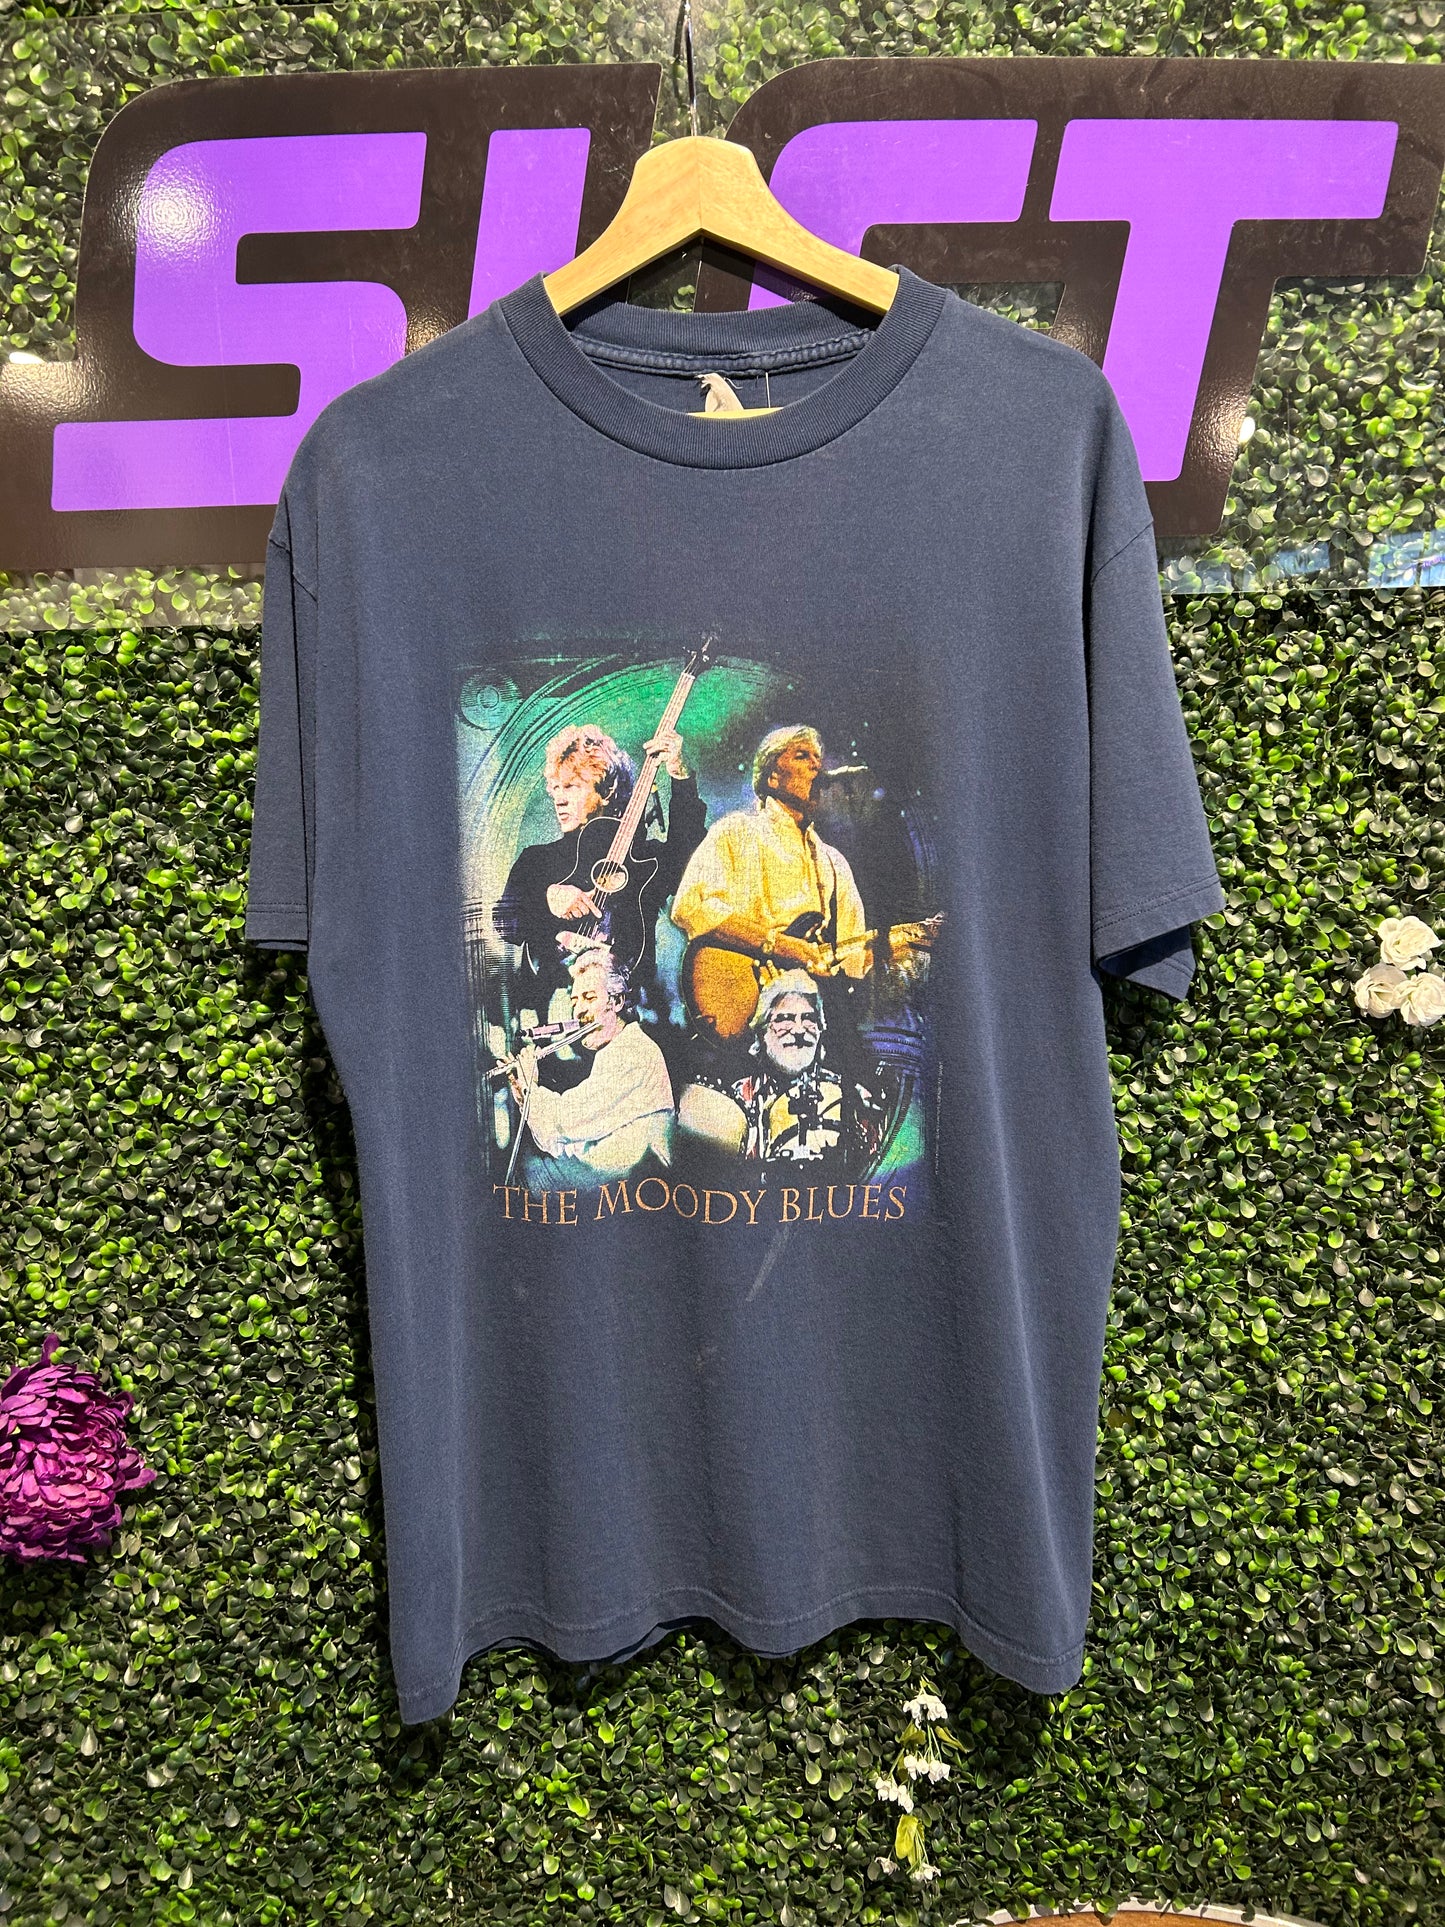 2000 The Moody Blues Hall of Fame T-Shirt. Size L/XL